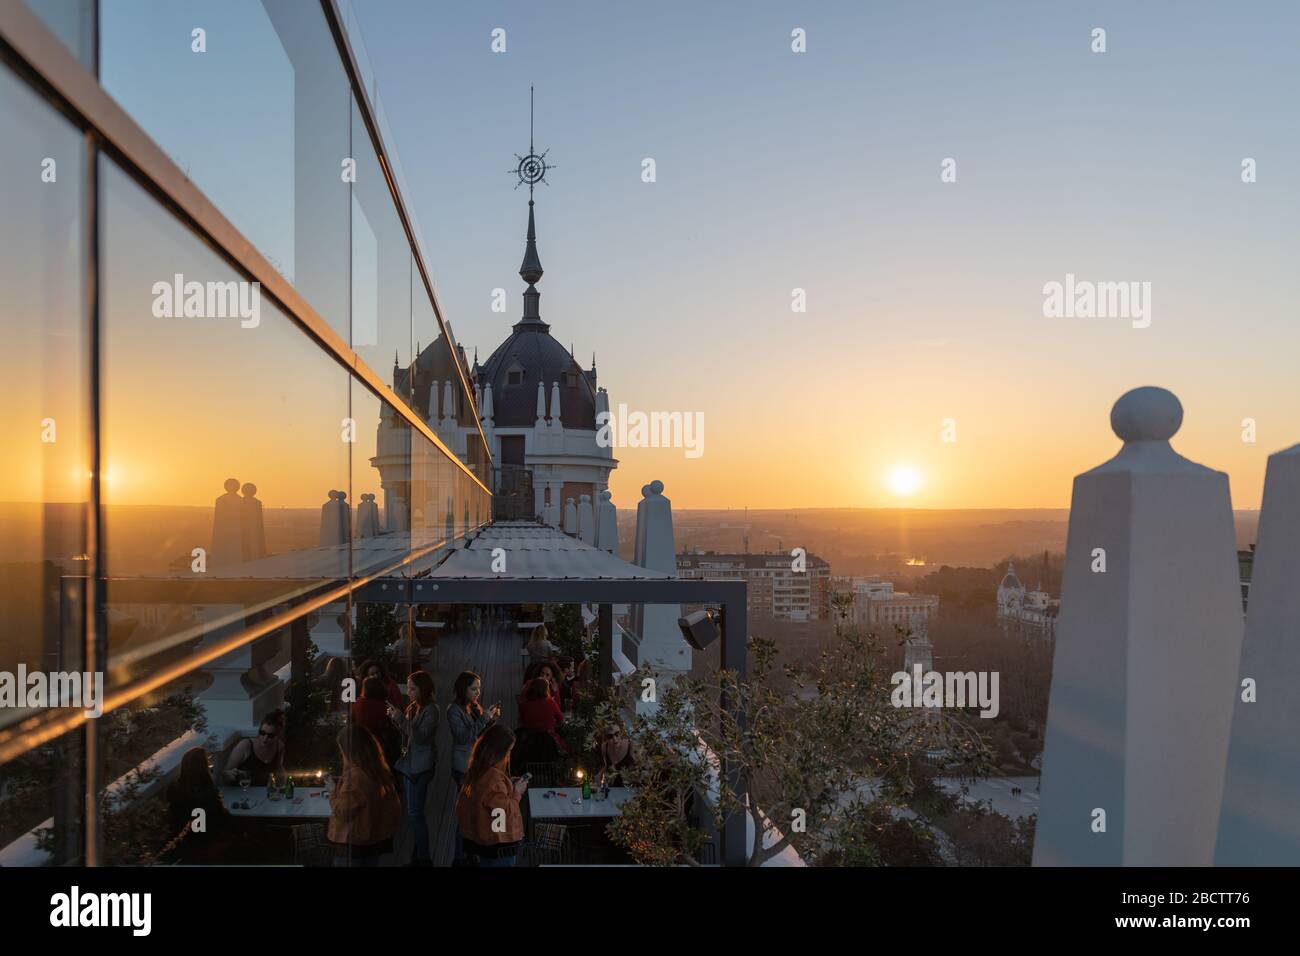 MADRID, SPAIN - FEBRUARY 24, 2019: Clients relaxing and having an aperitif on one of the many hotel rooftop terraces during the sunset in Madrid. Stock Photo